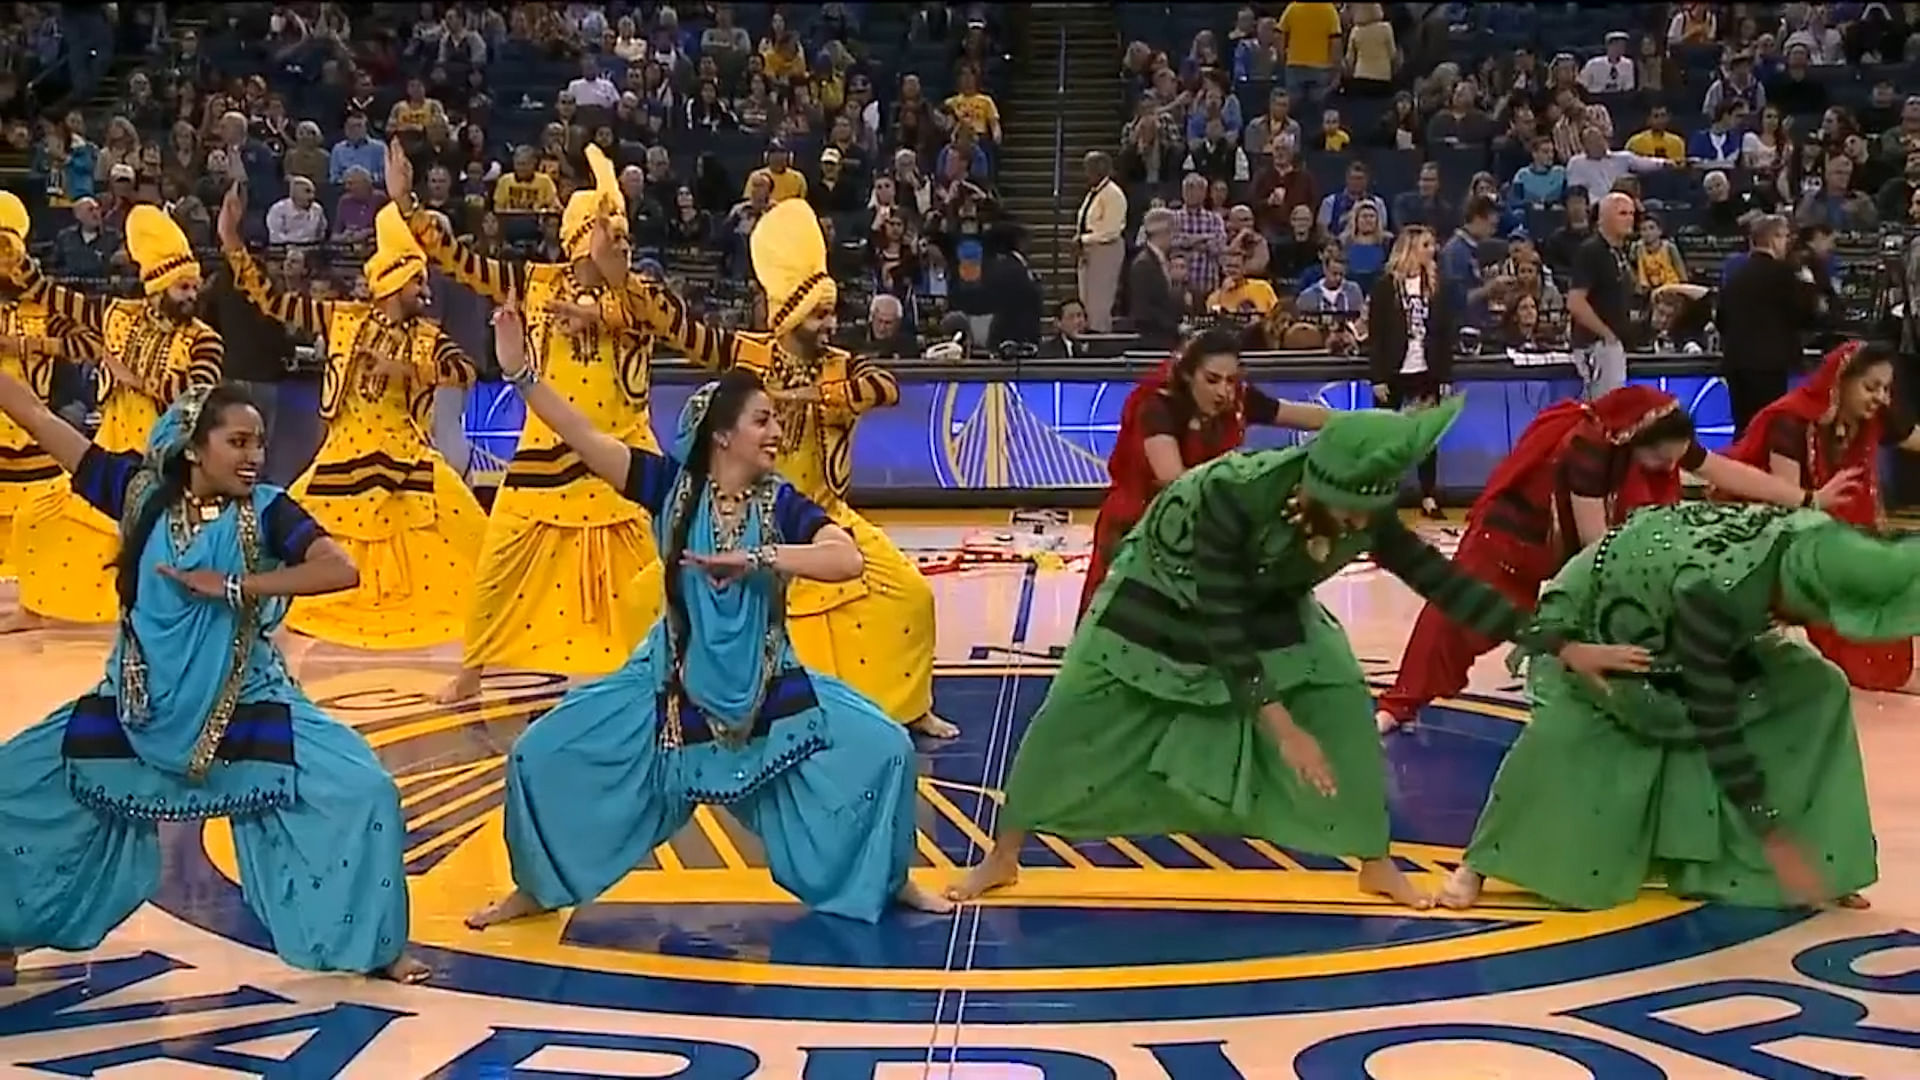 Bhangra Empire performs during the Half-Time show in the NBA (Photo: Facebook/NBA Screengrab)